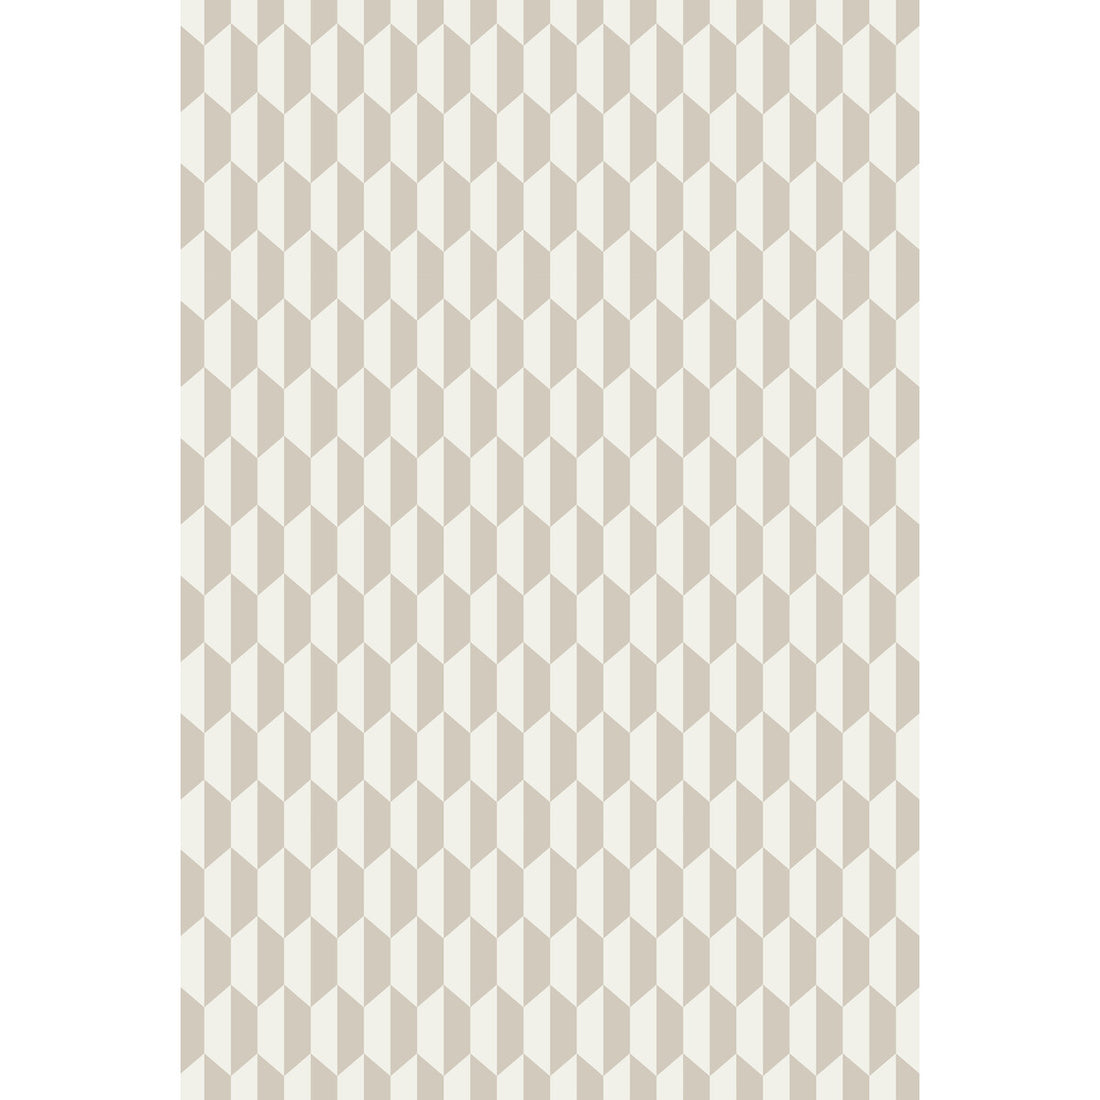 Tile fabric in cream &amp; oat color - pattern F111/9033.CS.0 - by Cole &amp; Son in the Cole &amp; Son Contemporary Fabrics collection